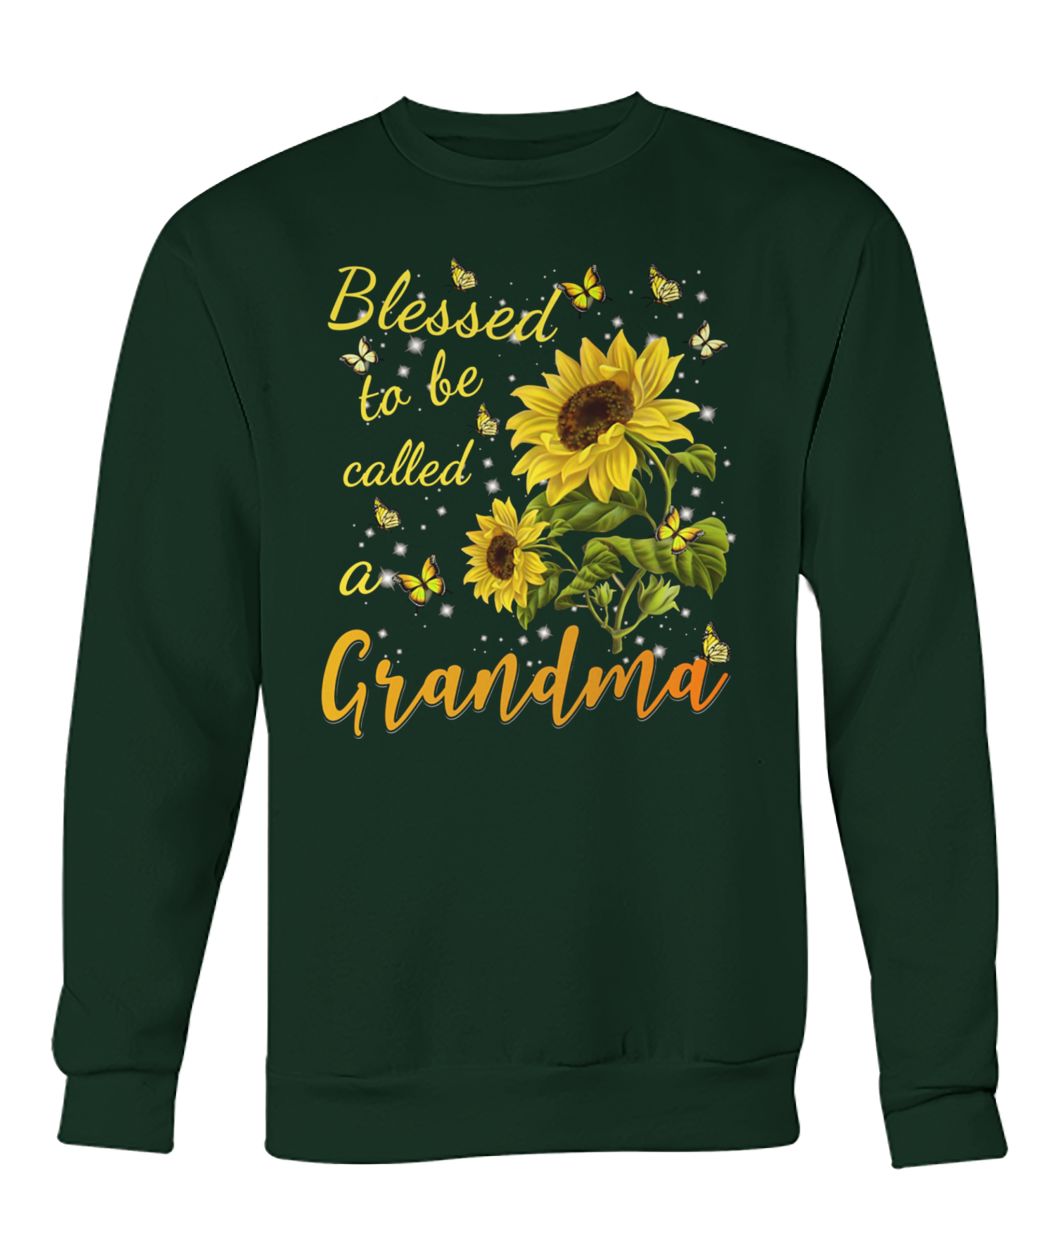 Sunflower blessed to be called a grandma crew neck sweatshirt